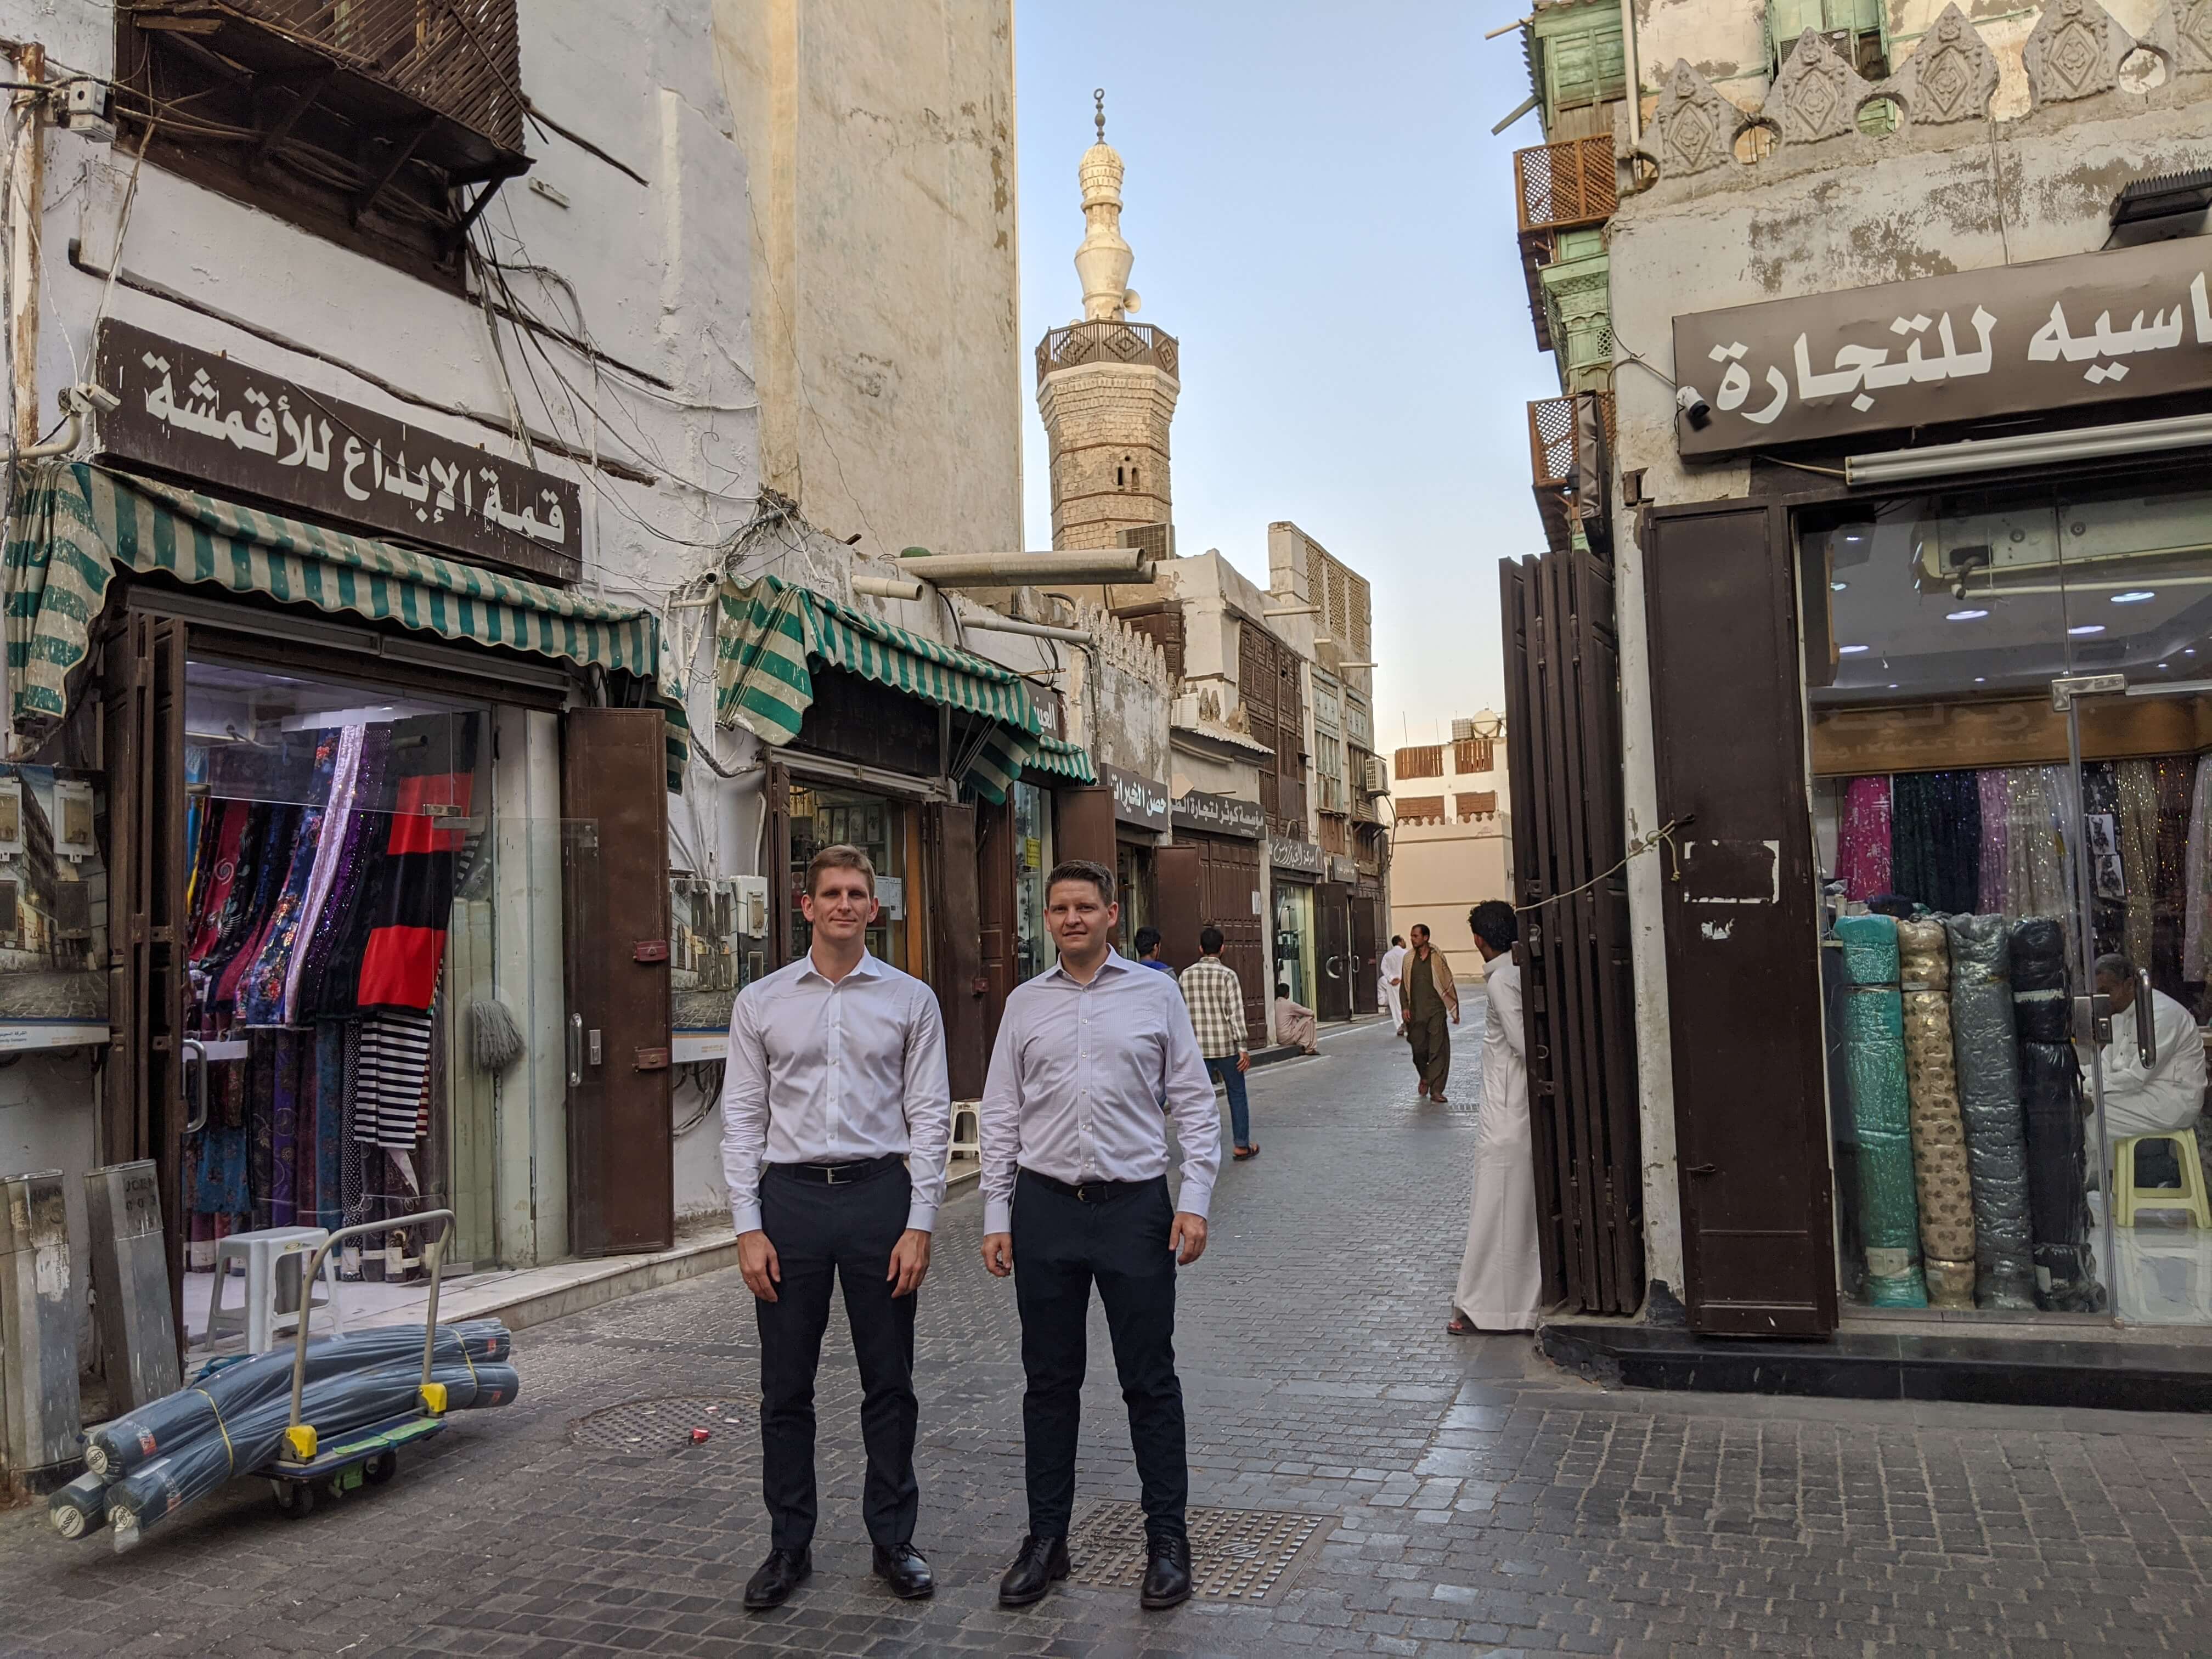 Evli Emerging Frontier fund investment team in Jeddah streets